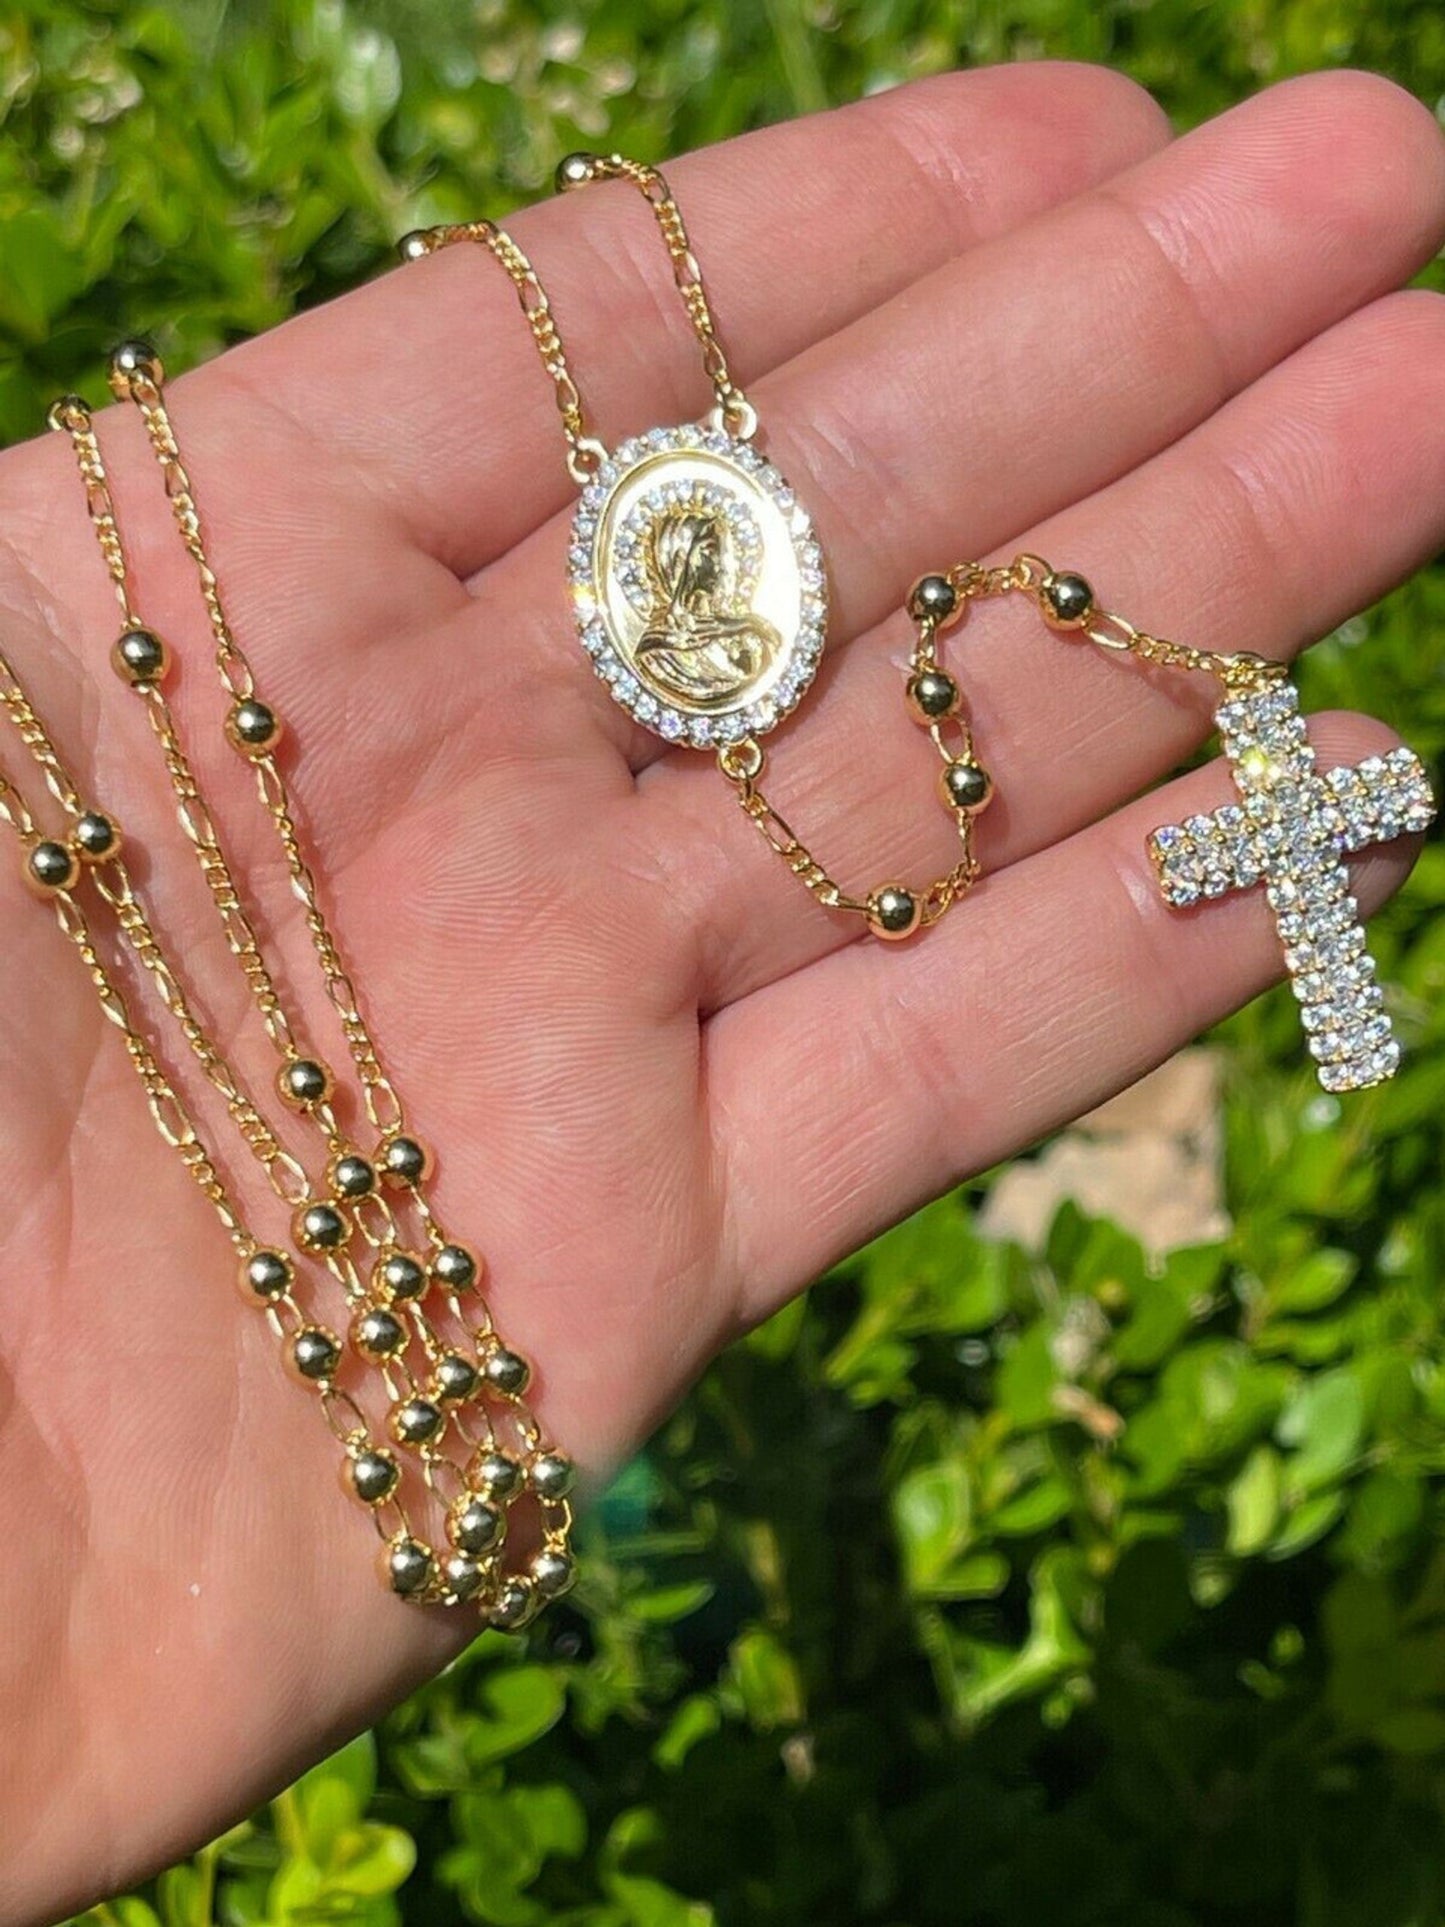 Rosary Beads Necklace Gold & Real 925 Sterling Silver Rosario Jesus Iced Diamond